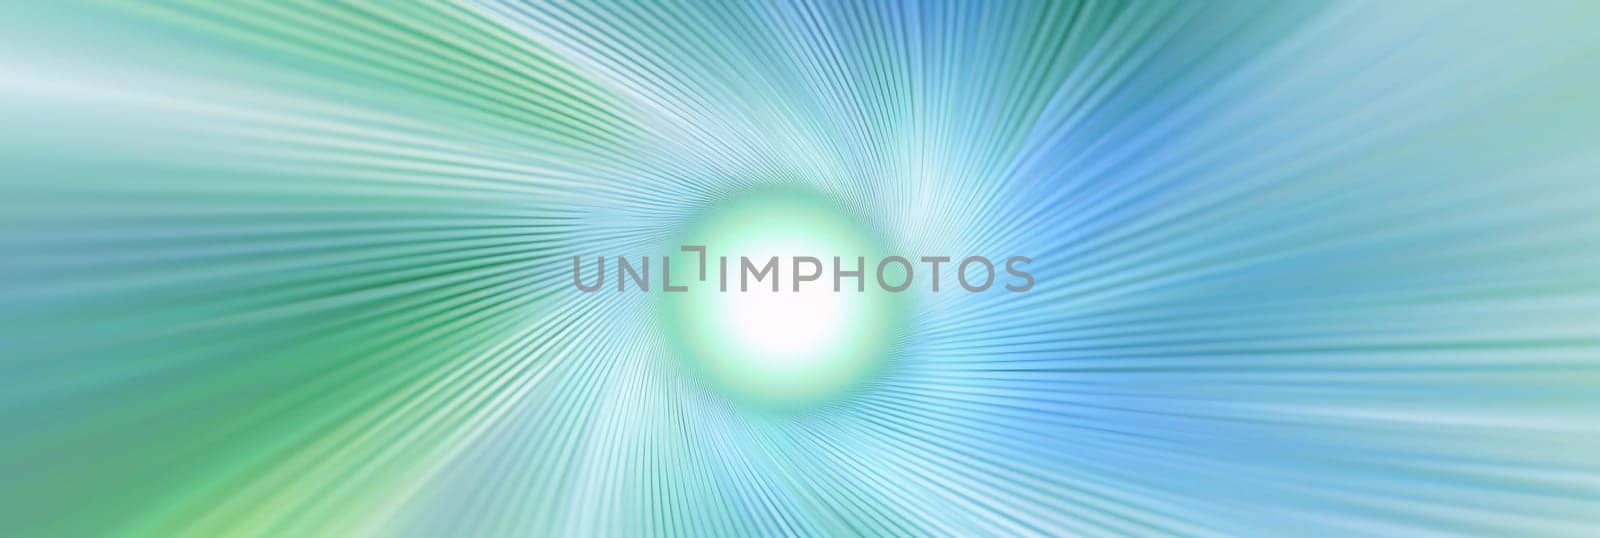 Abstract background design: abstract background with radial blur effect, computer generated abstract background, 3D rendering